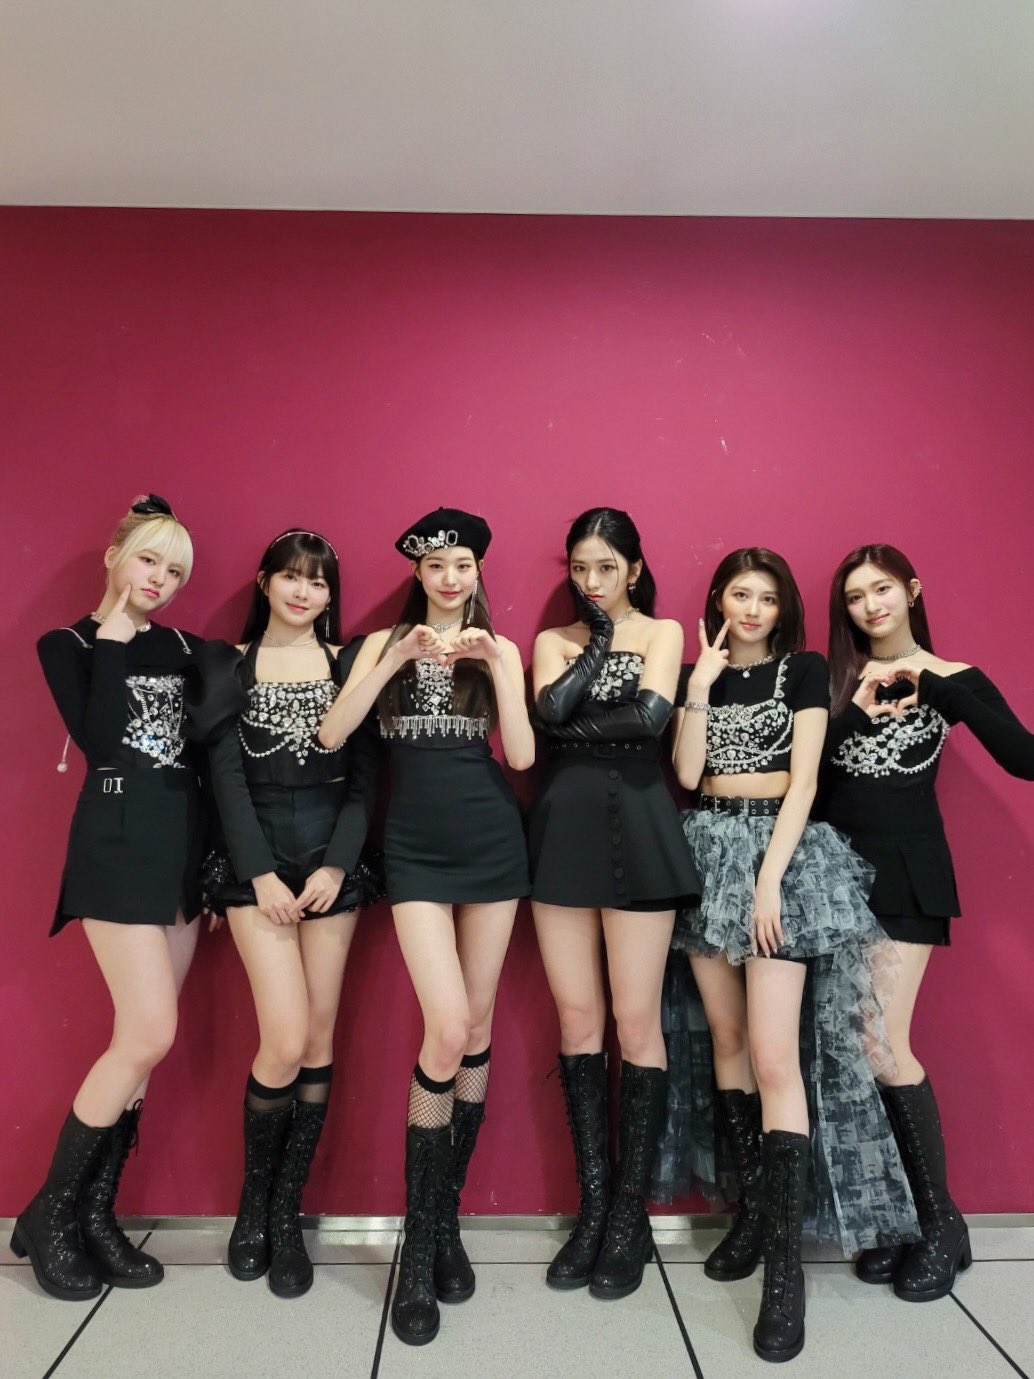 IVE, 'Music Bank]' 1st place for 2 weeks in a row "Thank you fans so much"